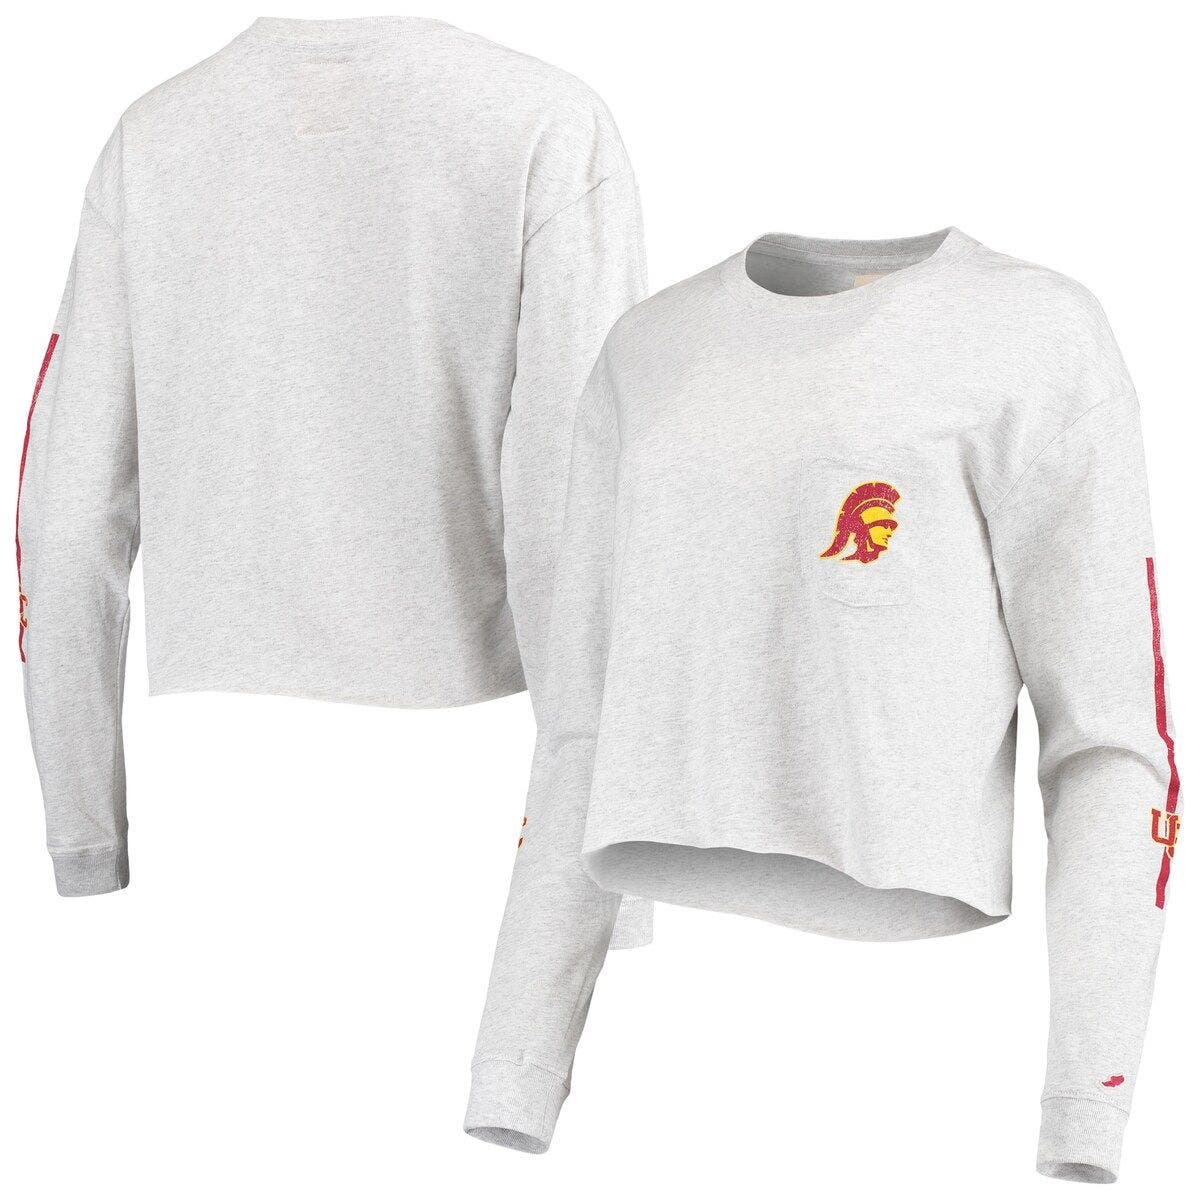 Nnova Era Long sleeved loose pullover sweatshirts for men and women 